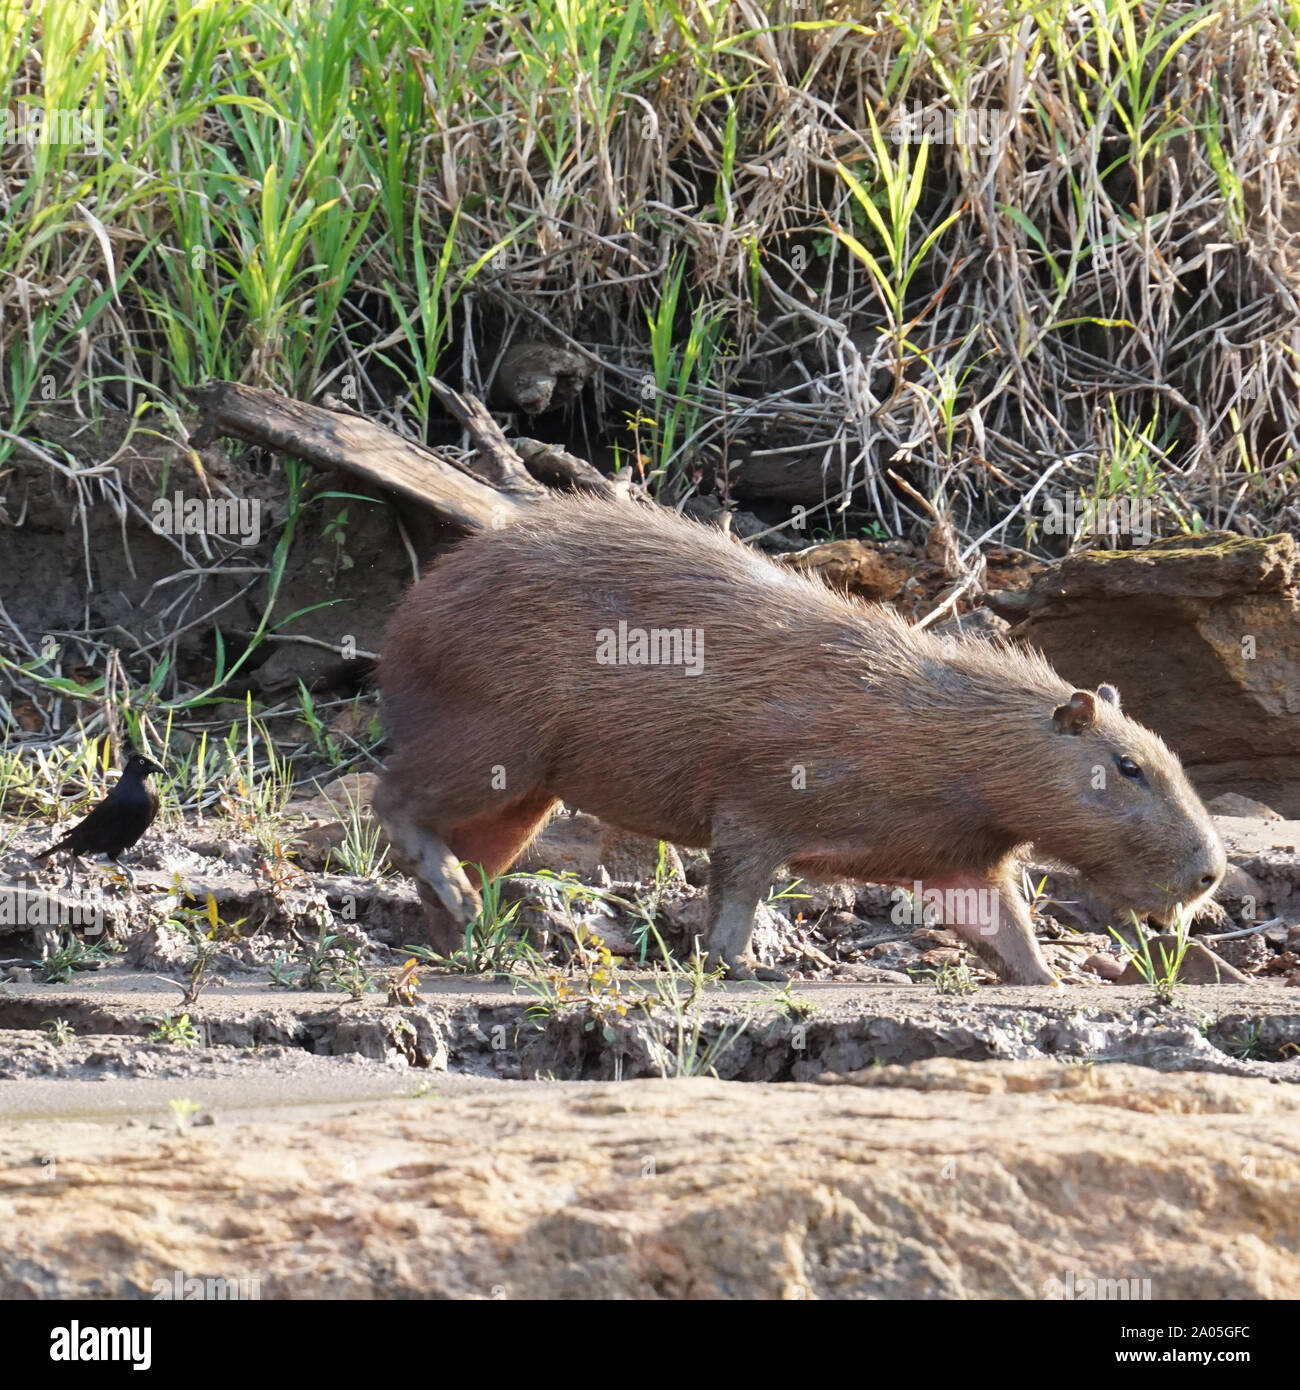 The capybara (Hydrochoerus hydrochaeris) is a mammal native to South America.  It is the largest living rodent in the world. Also called chigüire,  chigüiro and carpincho, this is a wild animal photographed